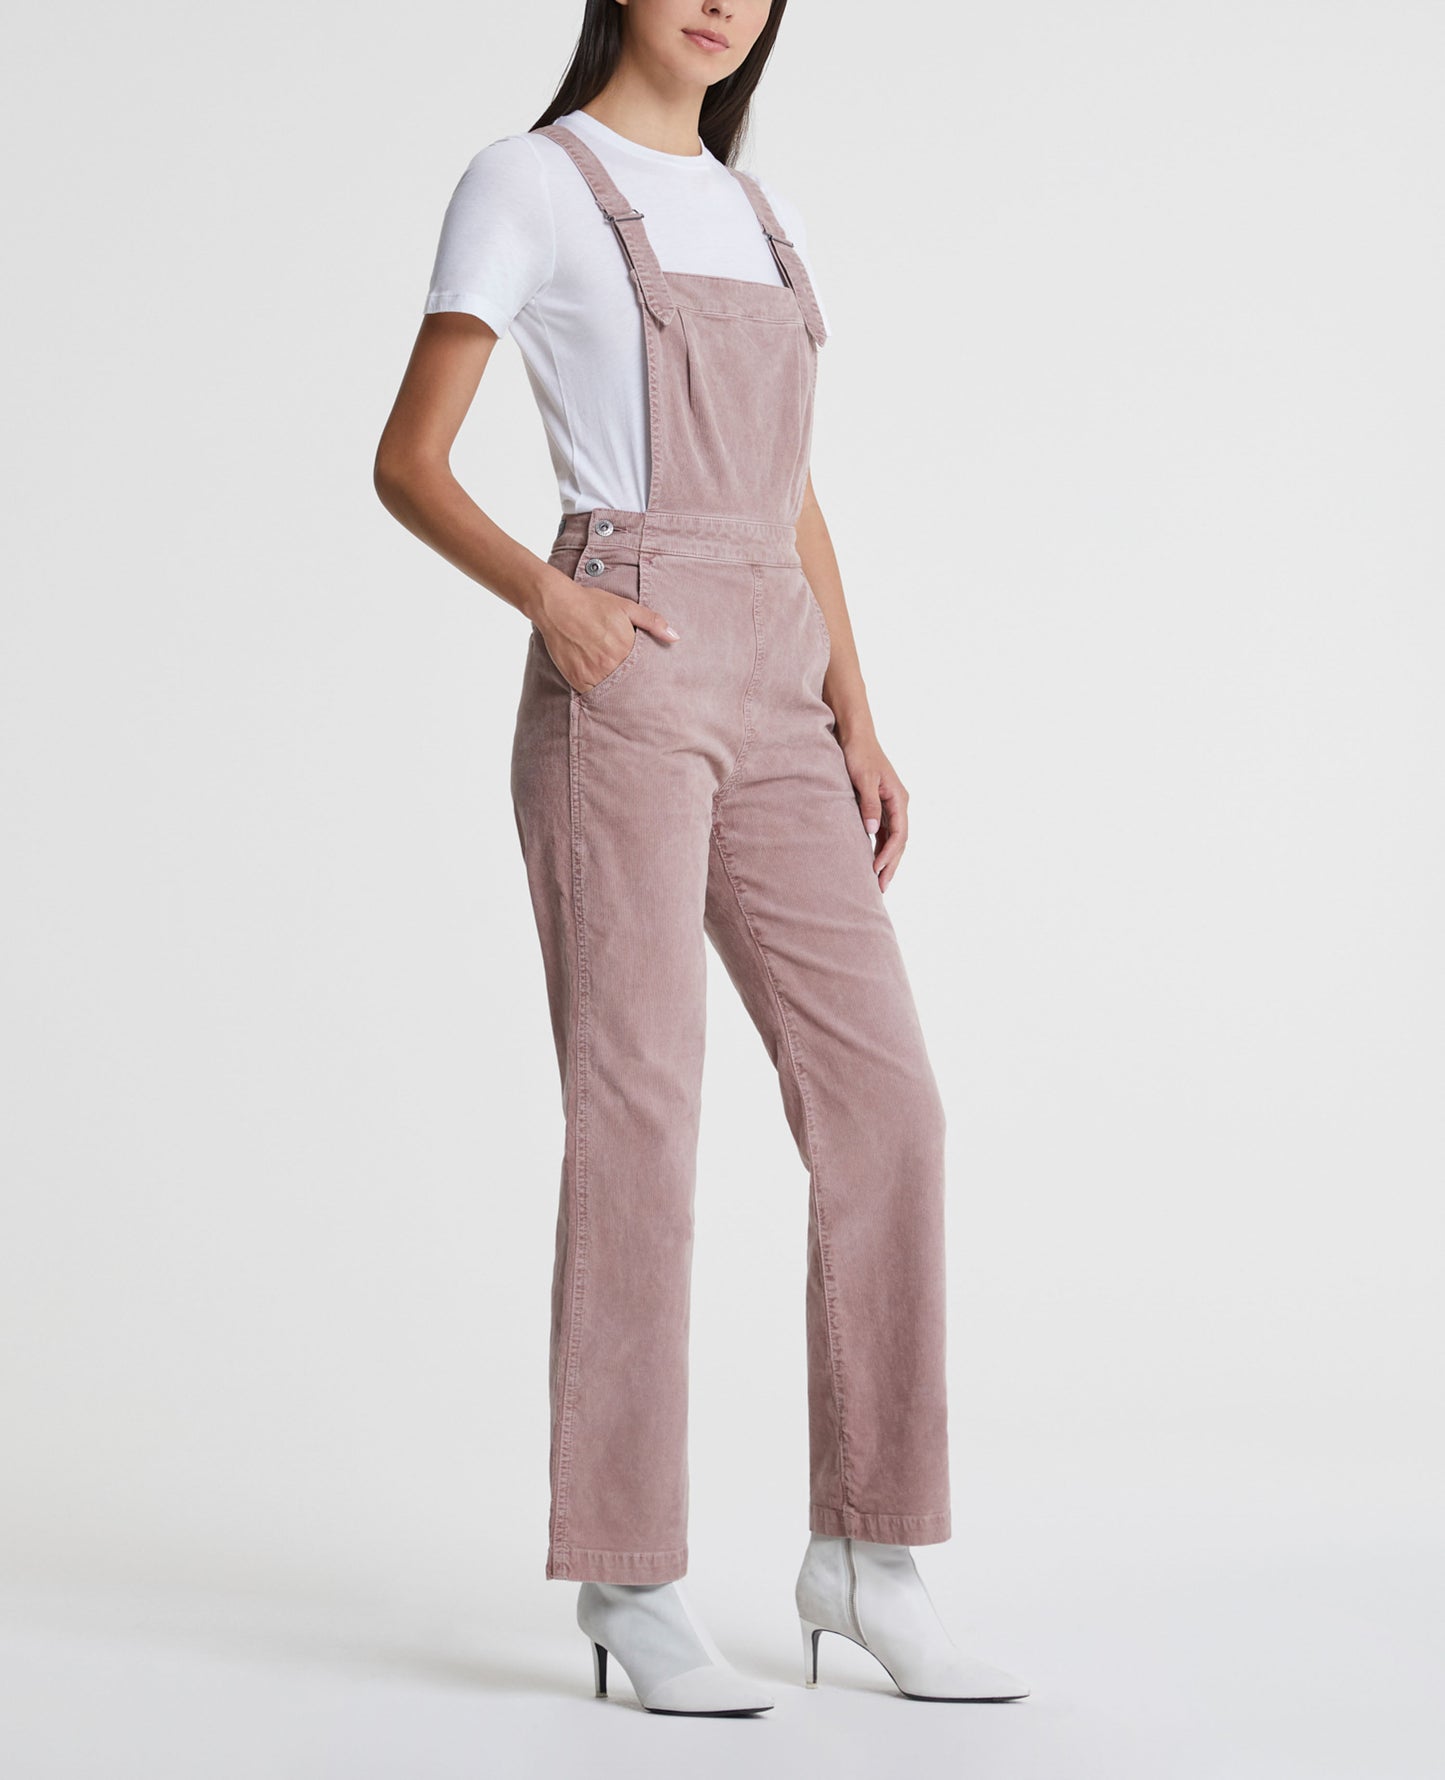 Gwendolyn Overall Sulfur Pale Wisteria Corduroy Women Onepiece Photo 2